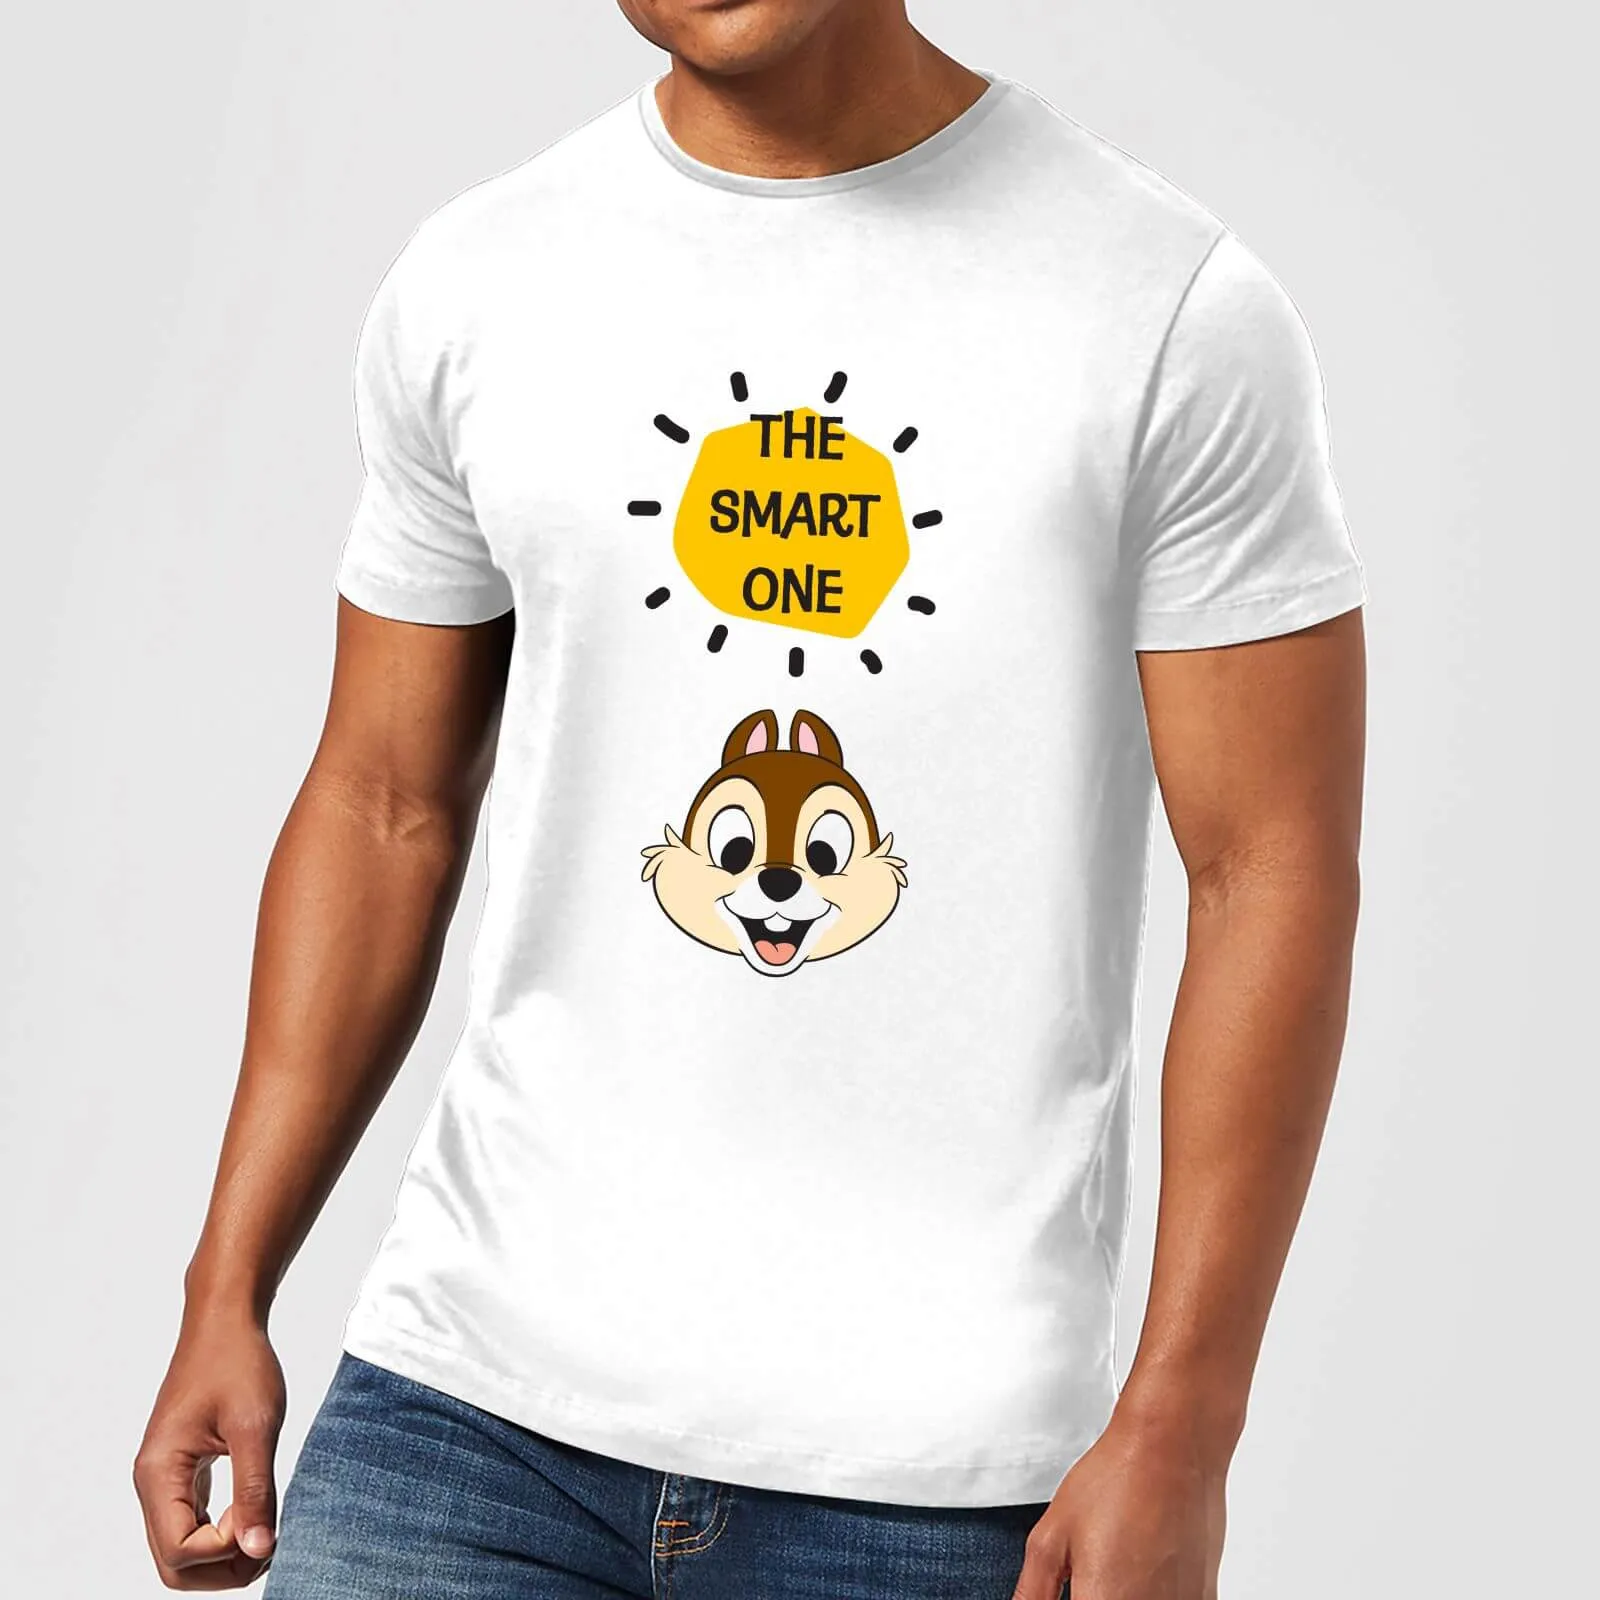  Chip 'N' Dale The Smart One Men's T-Shirt - White - XXL